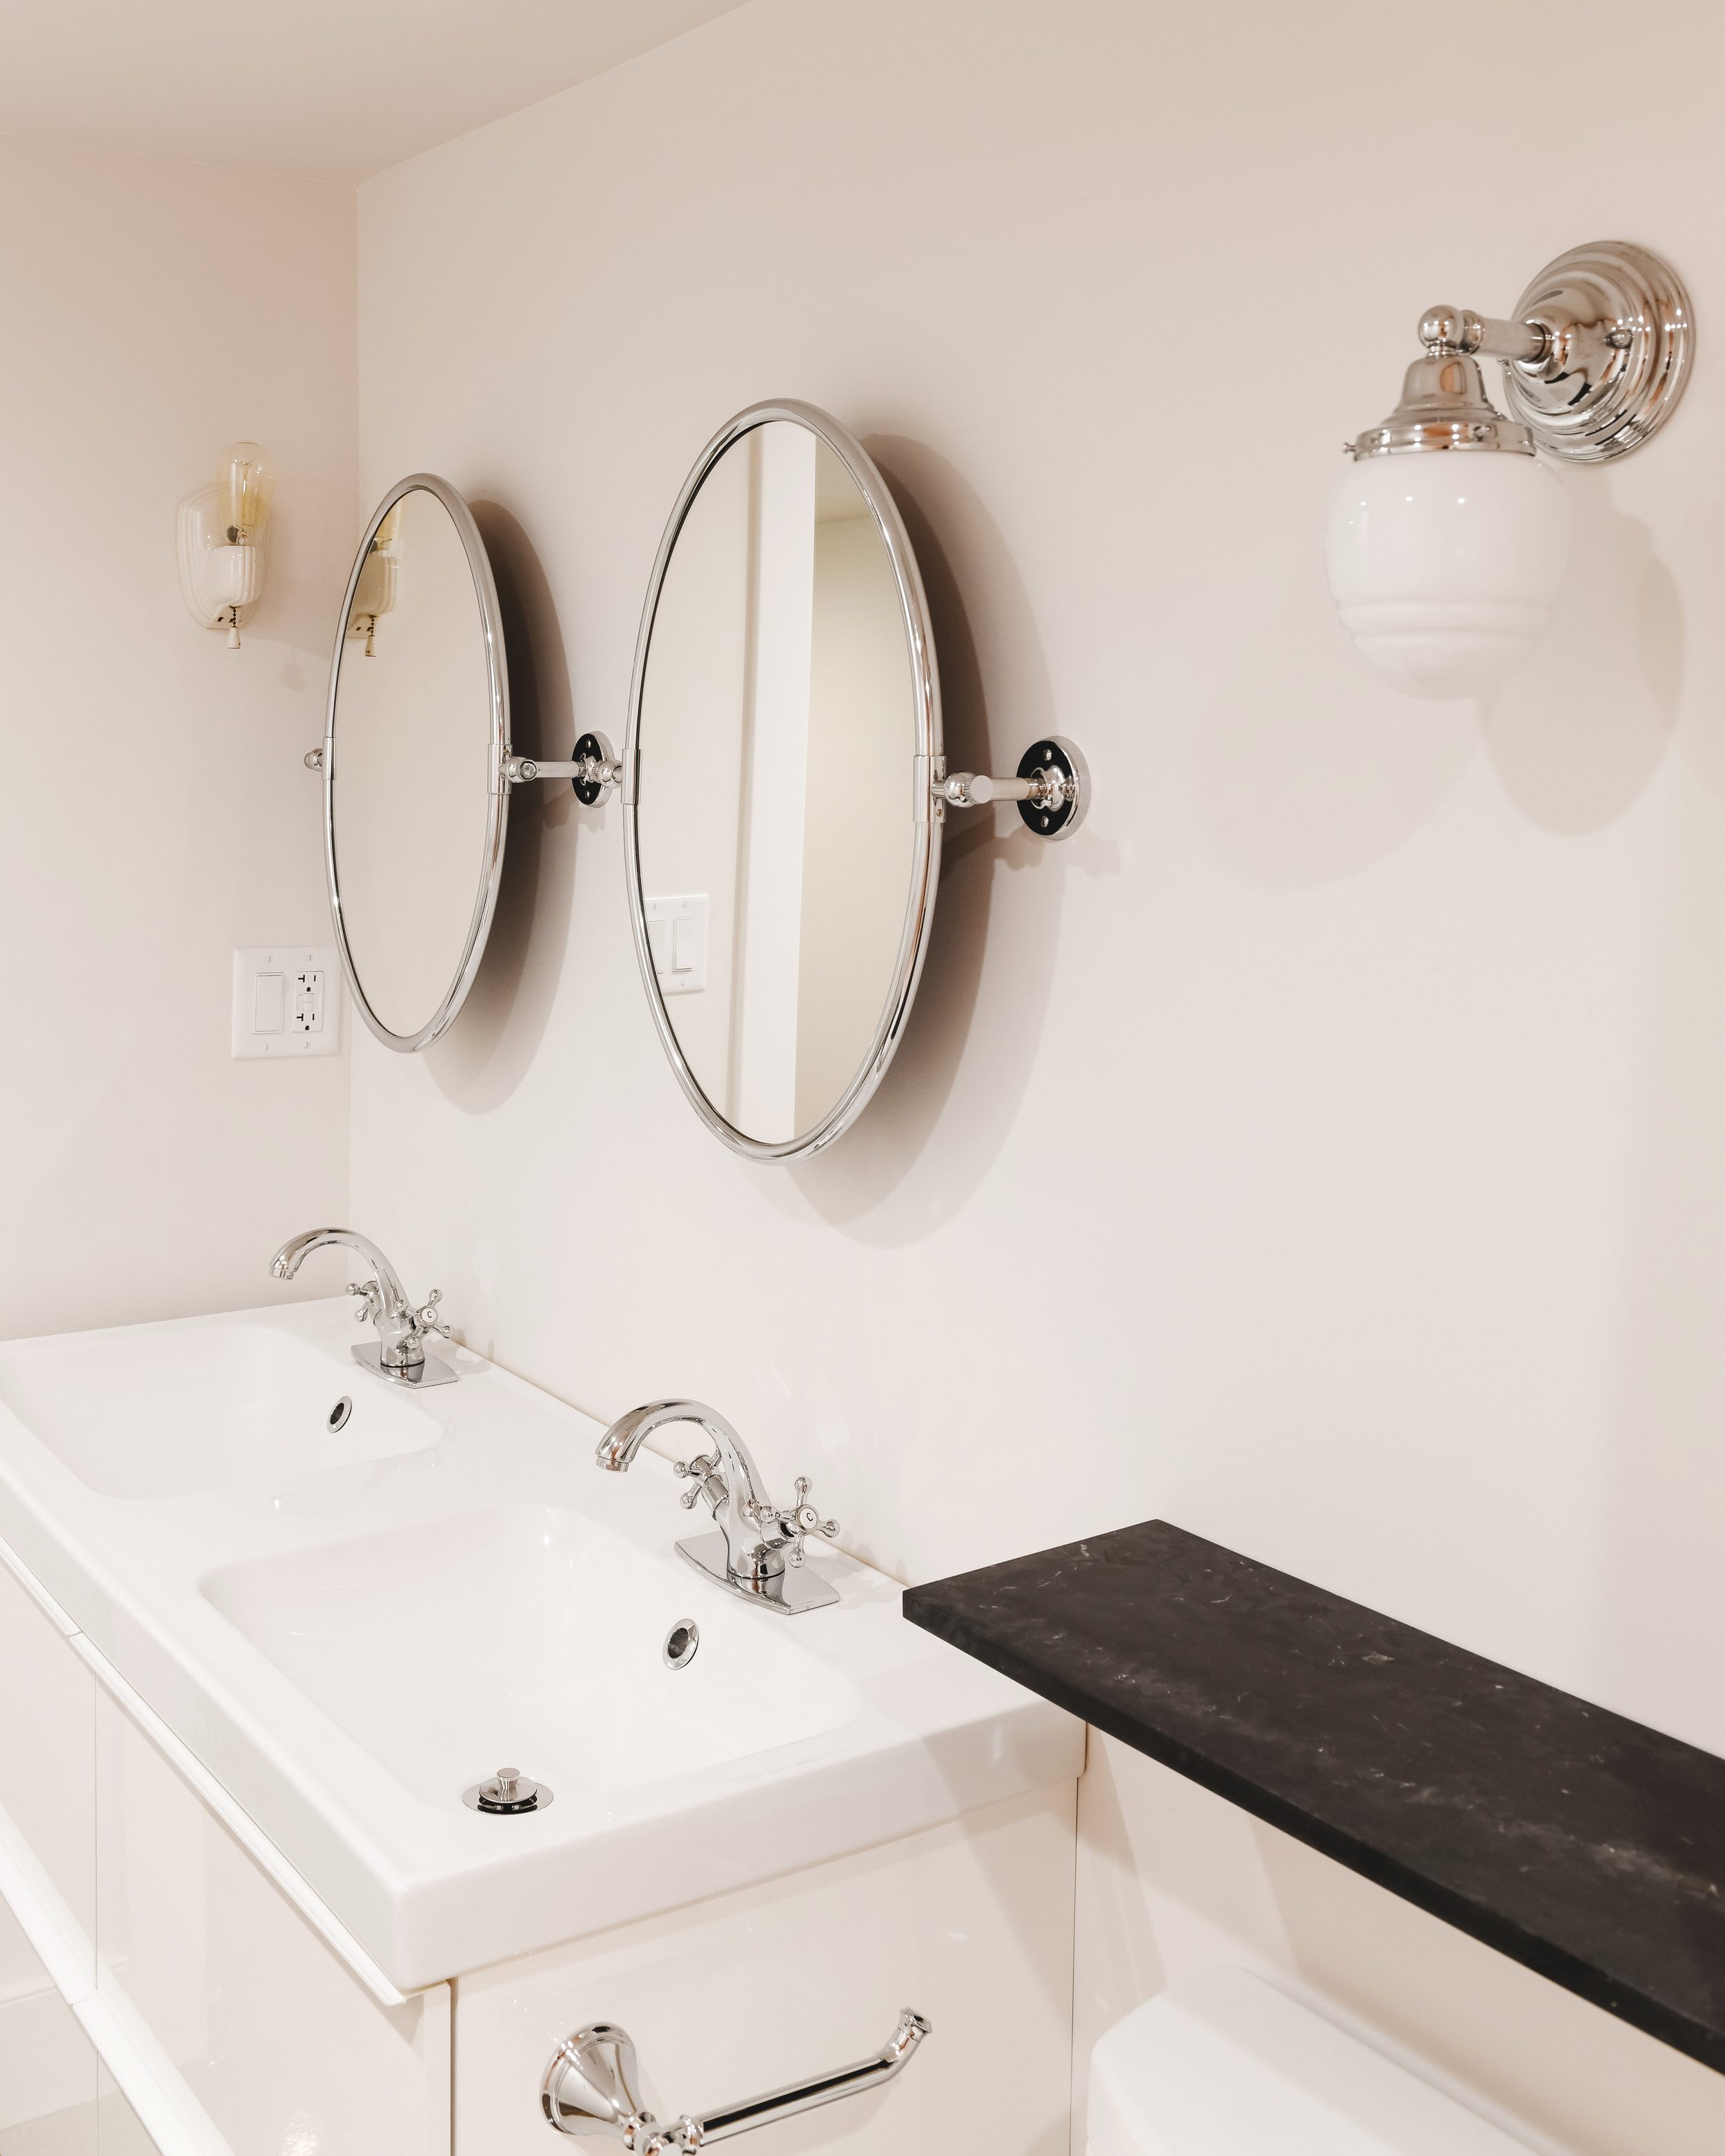 a pair of sconces, faucets and mirrors | Two Flat den bathroom before + after! | via Yellow Brick Home